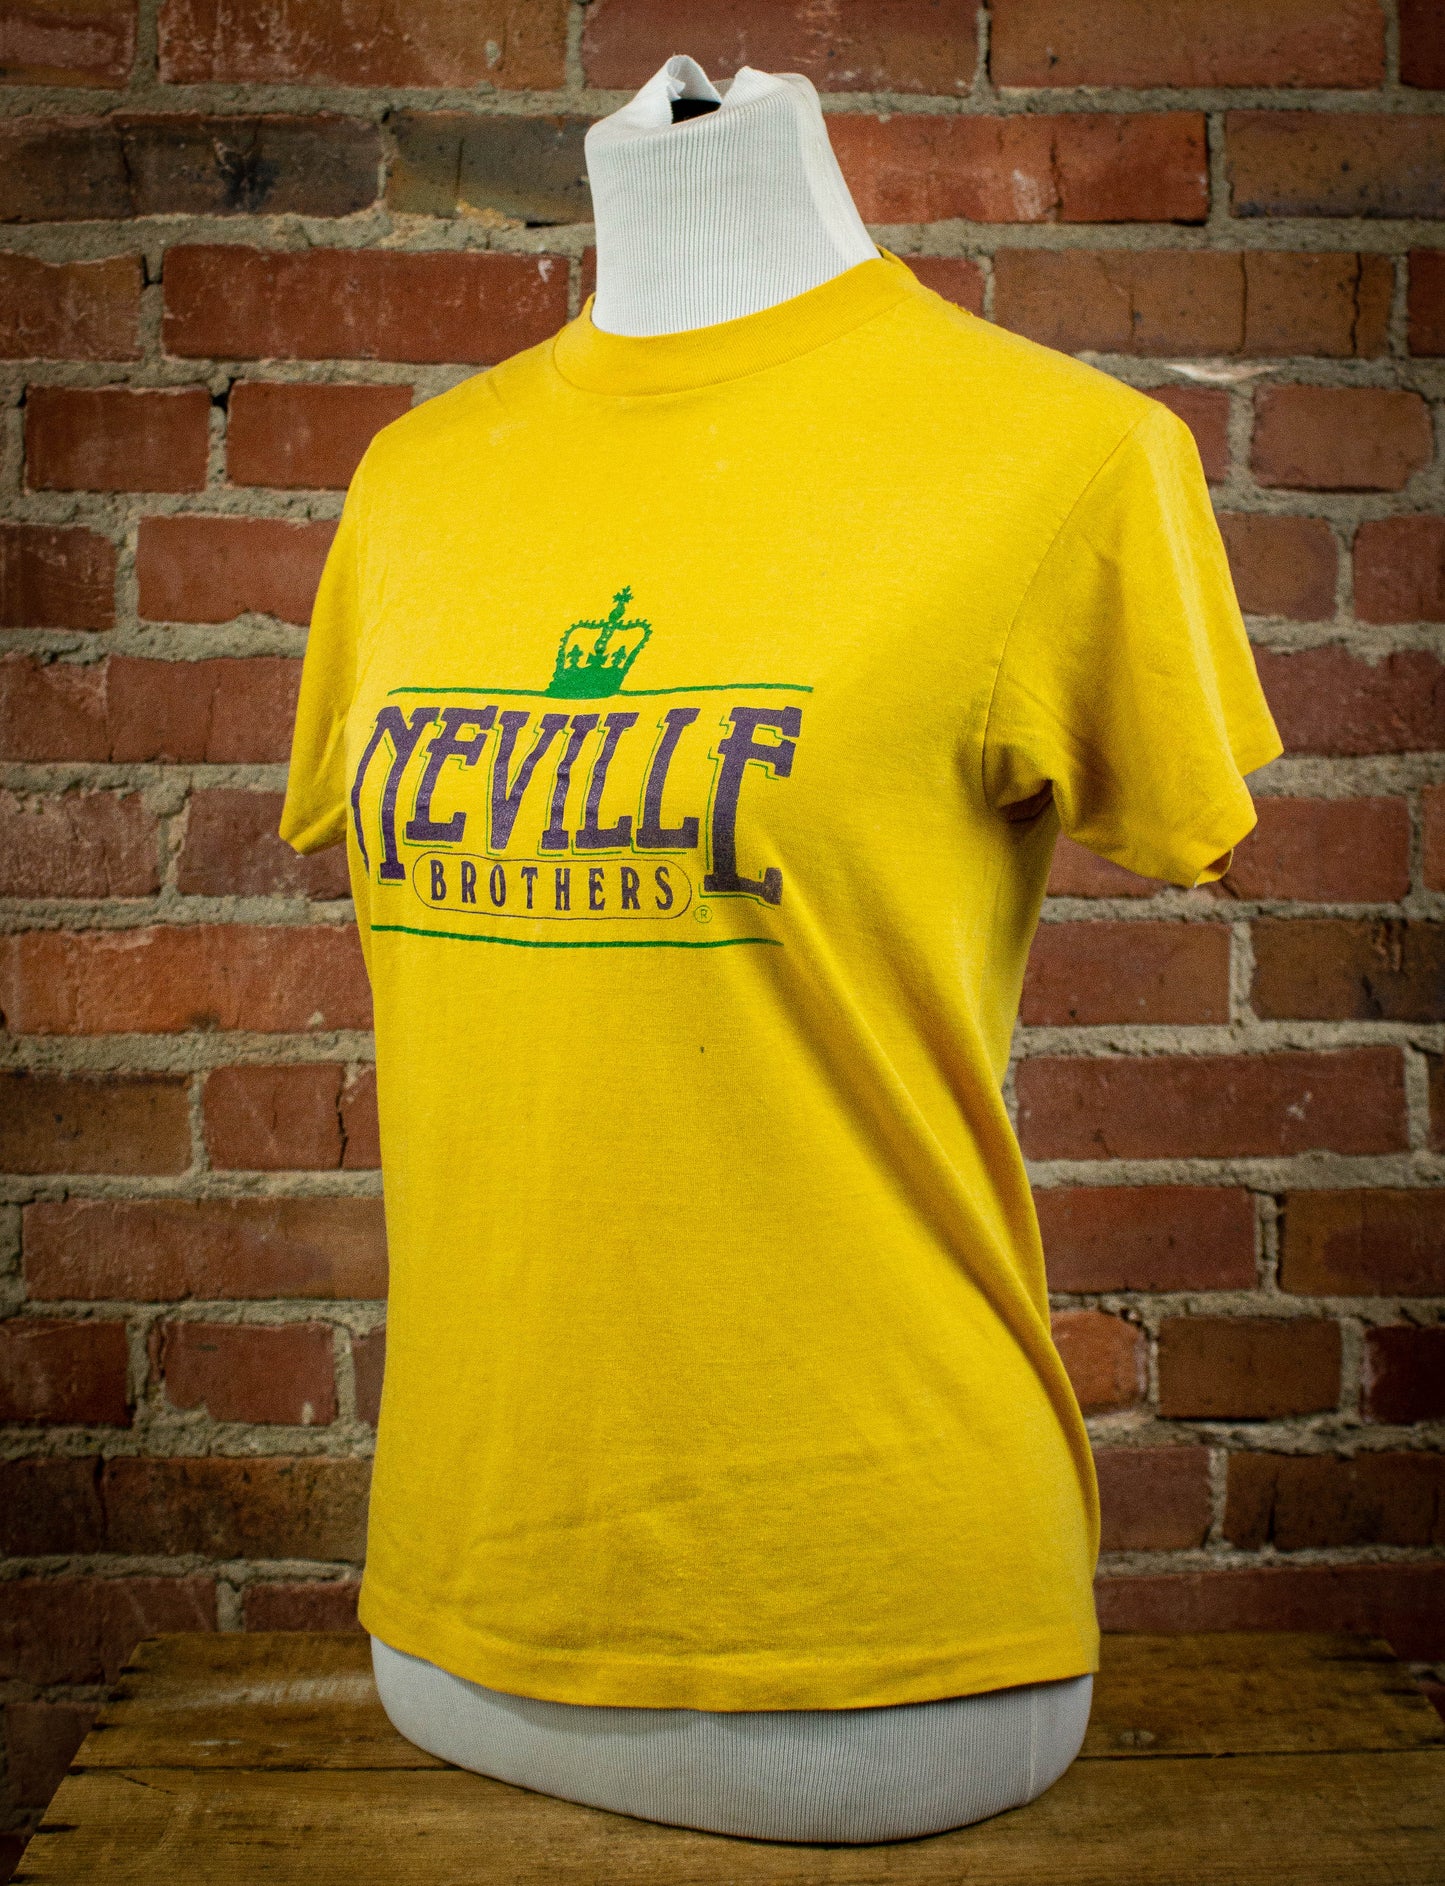 Vintage Early 80's Neville Bro's Yellow Concert T Shirt Unisex Small